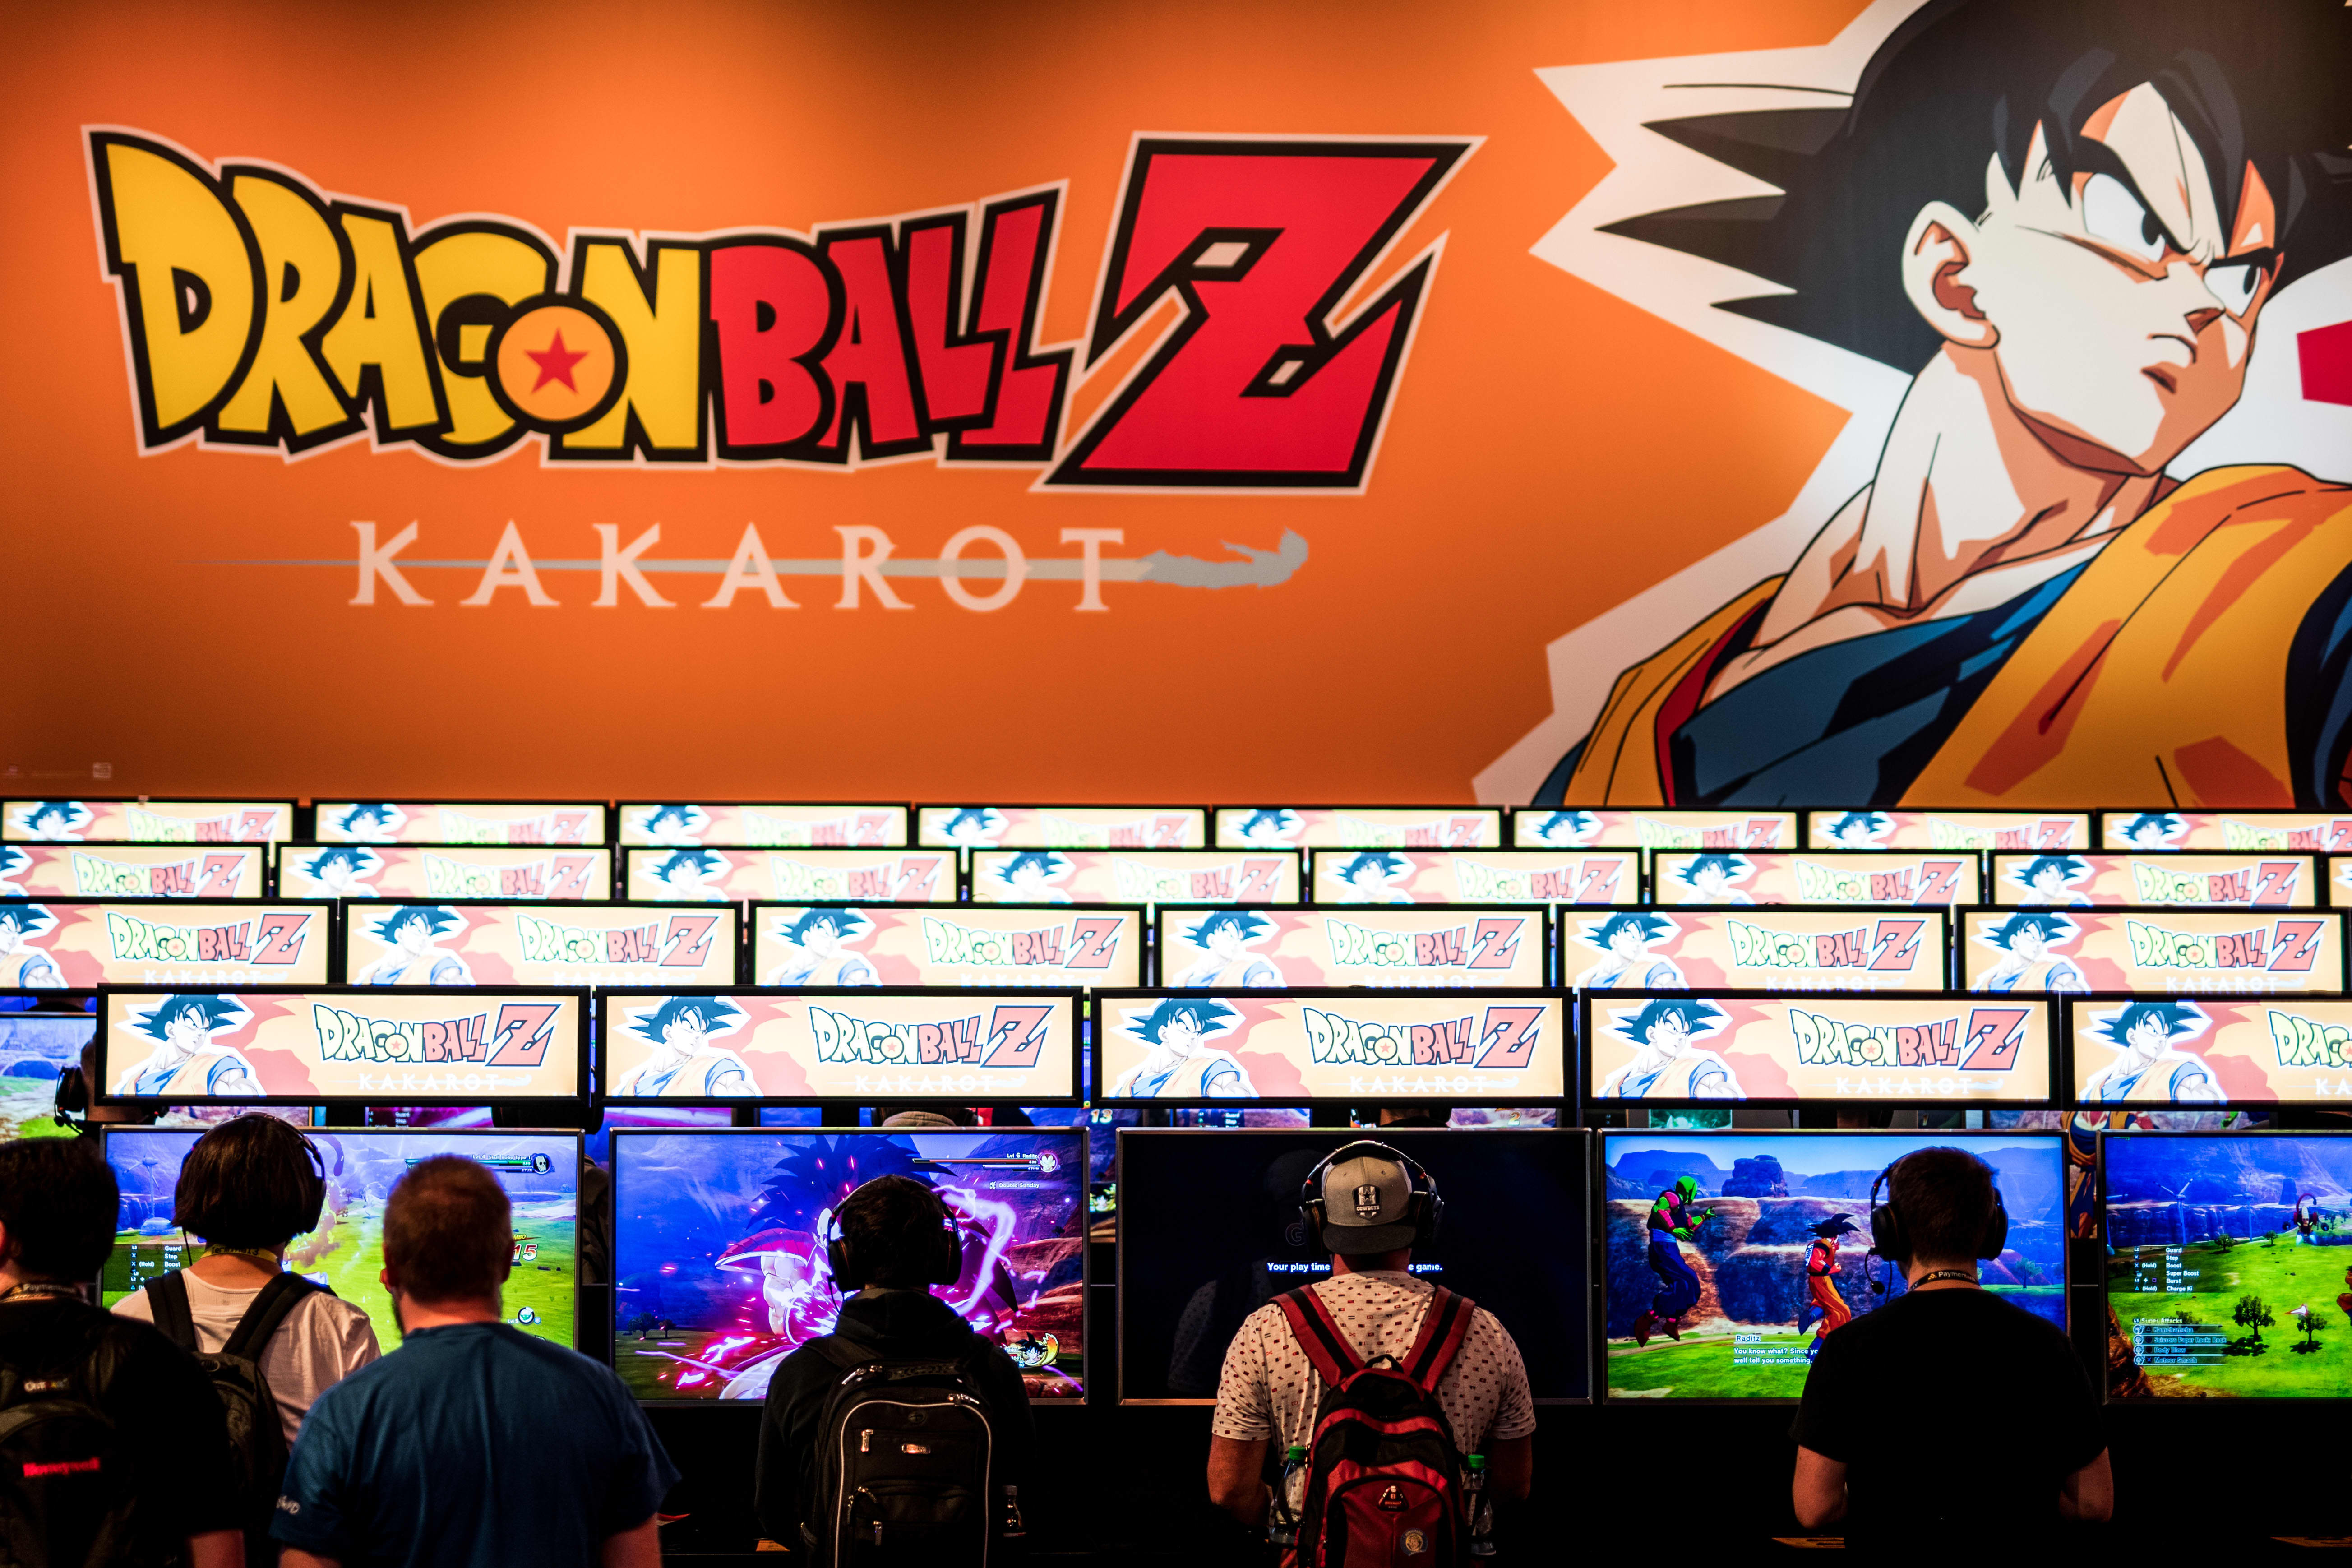 The world’s first Dragon Ball Z theme park is being constructed in Saudi Arabia